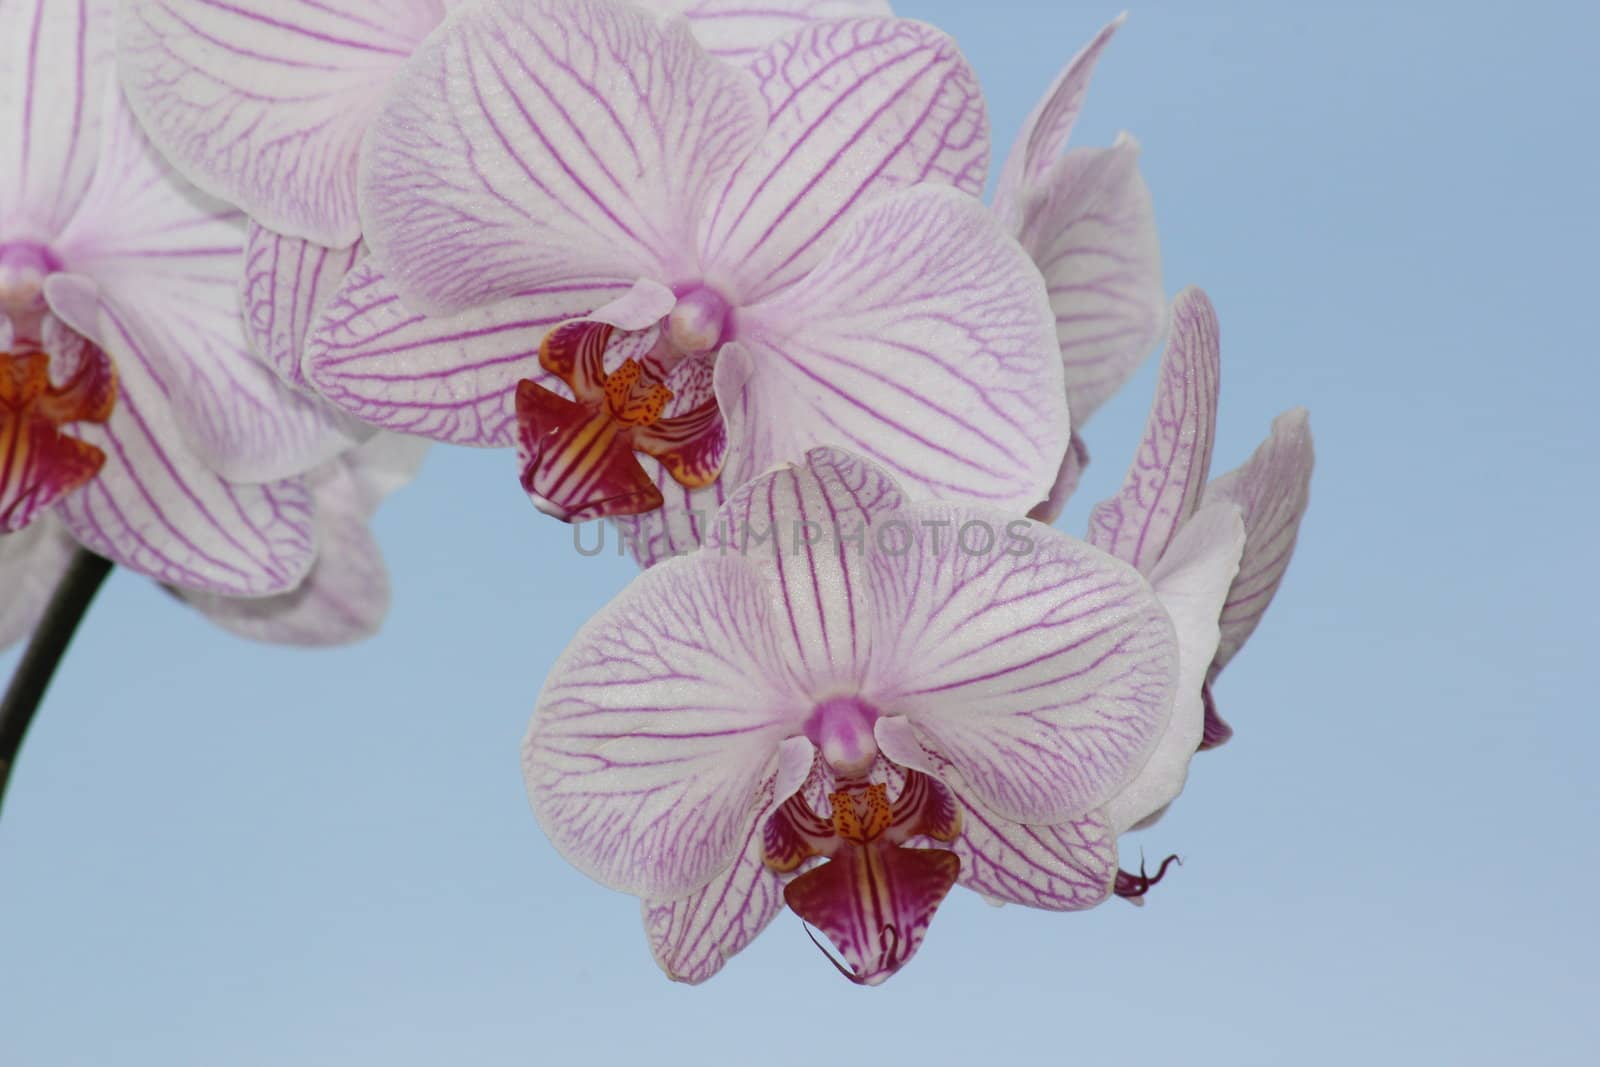 Macro of a Orchid on a neutral background, taken in Norway